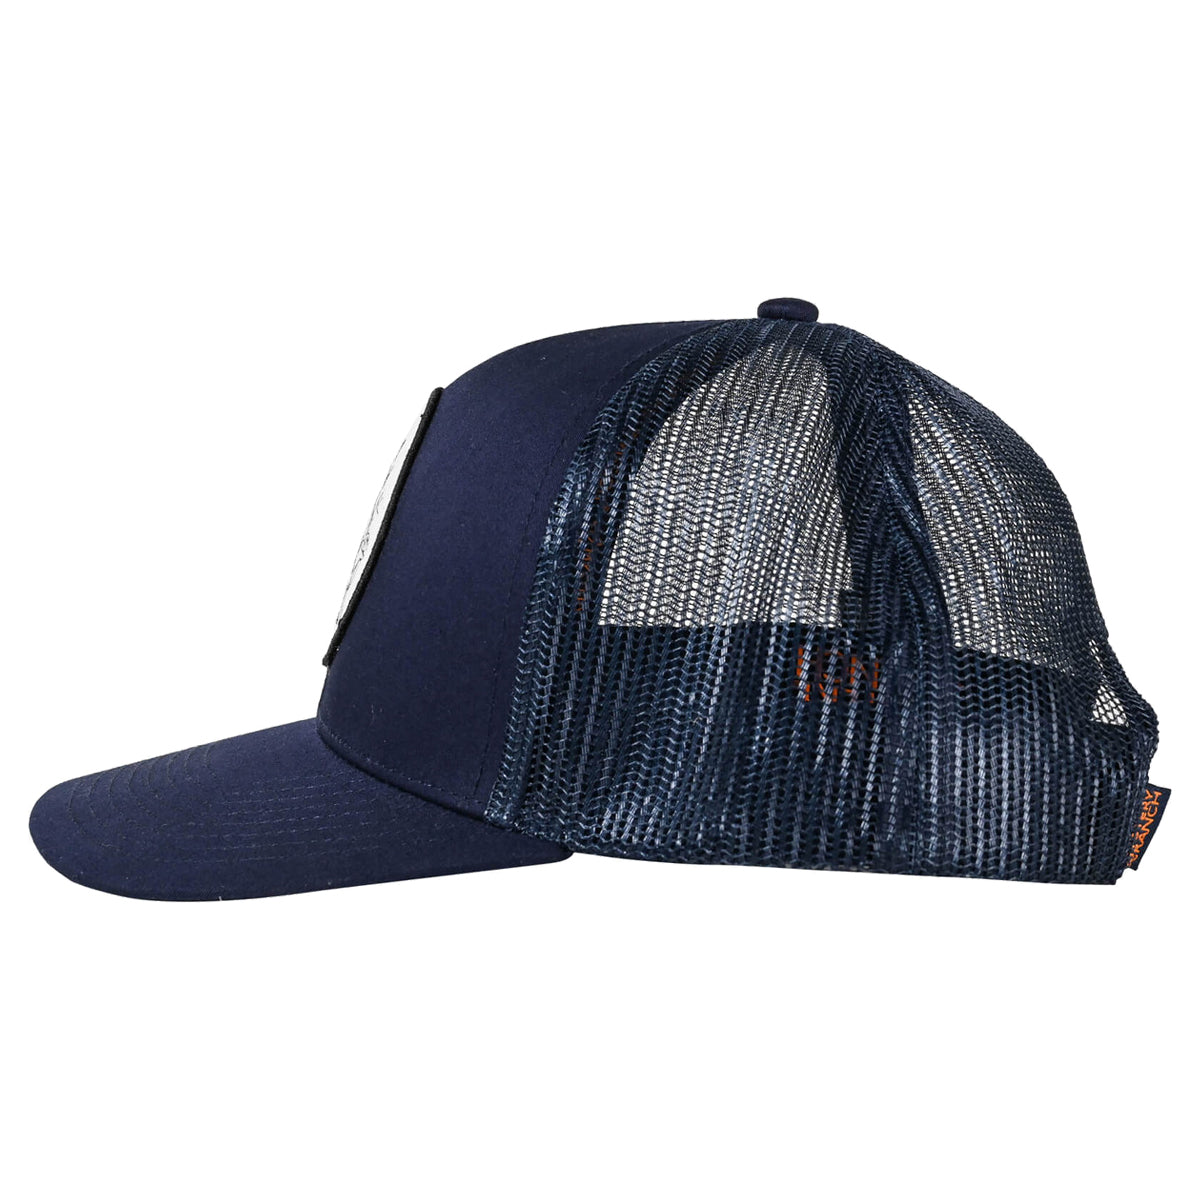 Mystery Ranch Ranch Rider Trucker Hat in Navy by GOHUNT | Mystery Ranch - GOHUNT Shop